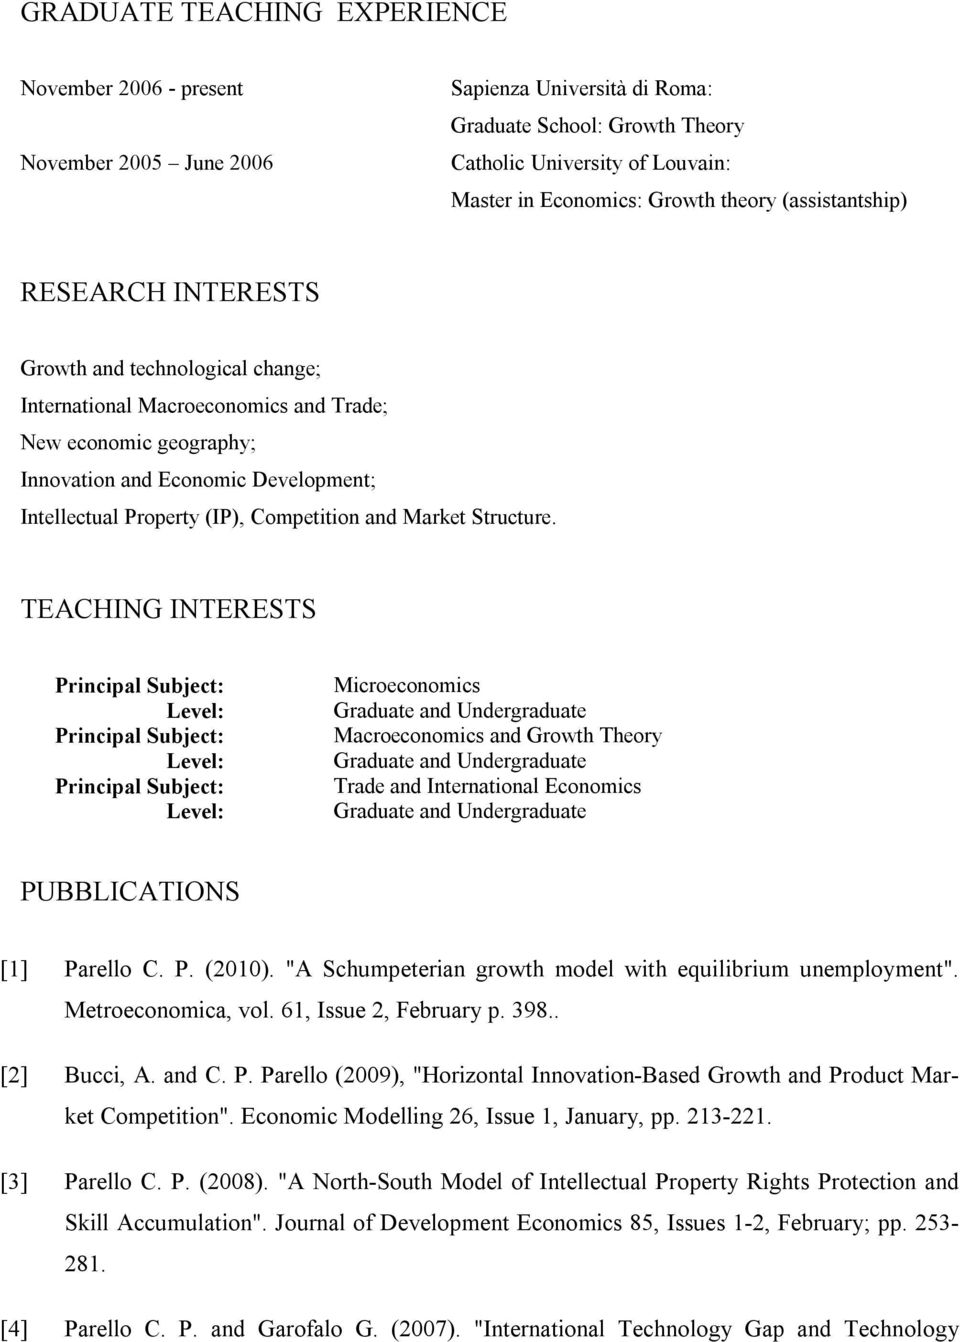 Market Structure. TEACHING INTERESTS Microeconomics Macroeconomics and Growth Theory Trade and International Economics PUBBLICATIONS [1] Parello C. P. (2010).